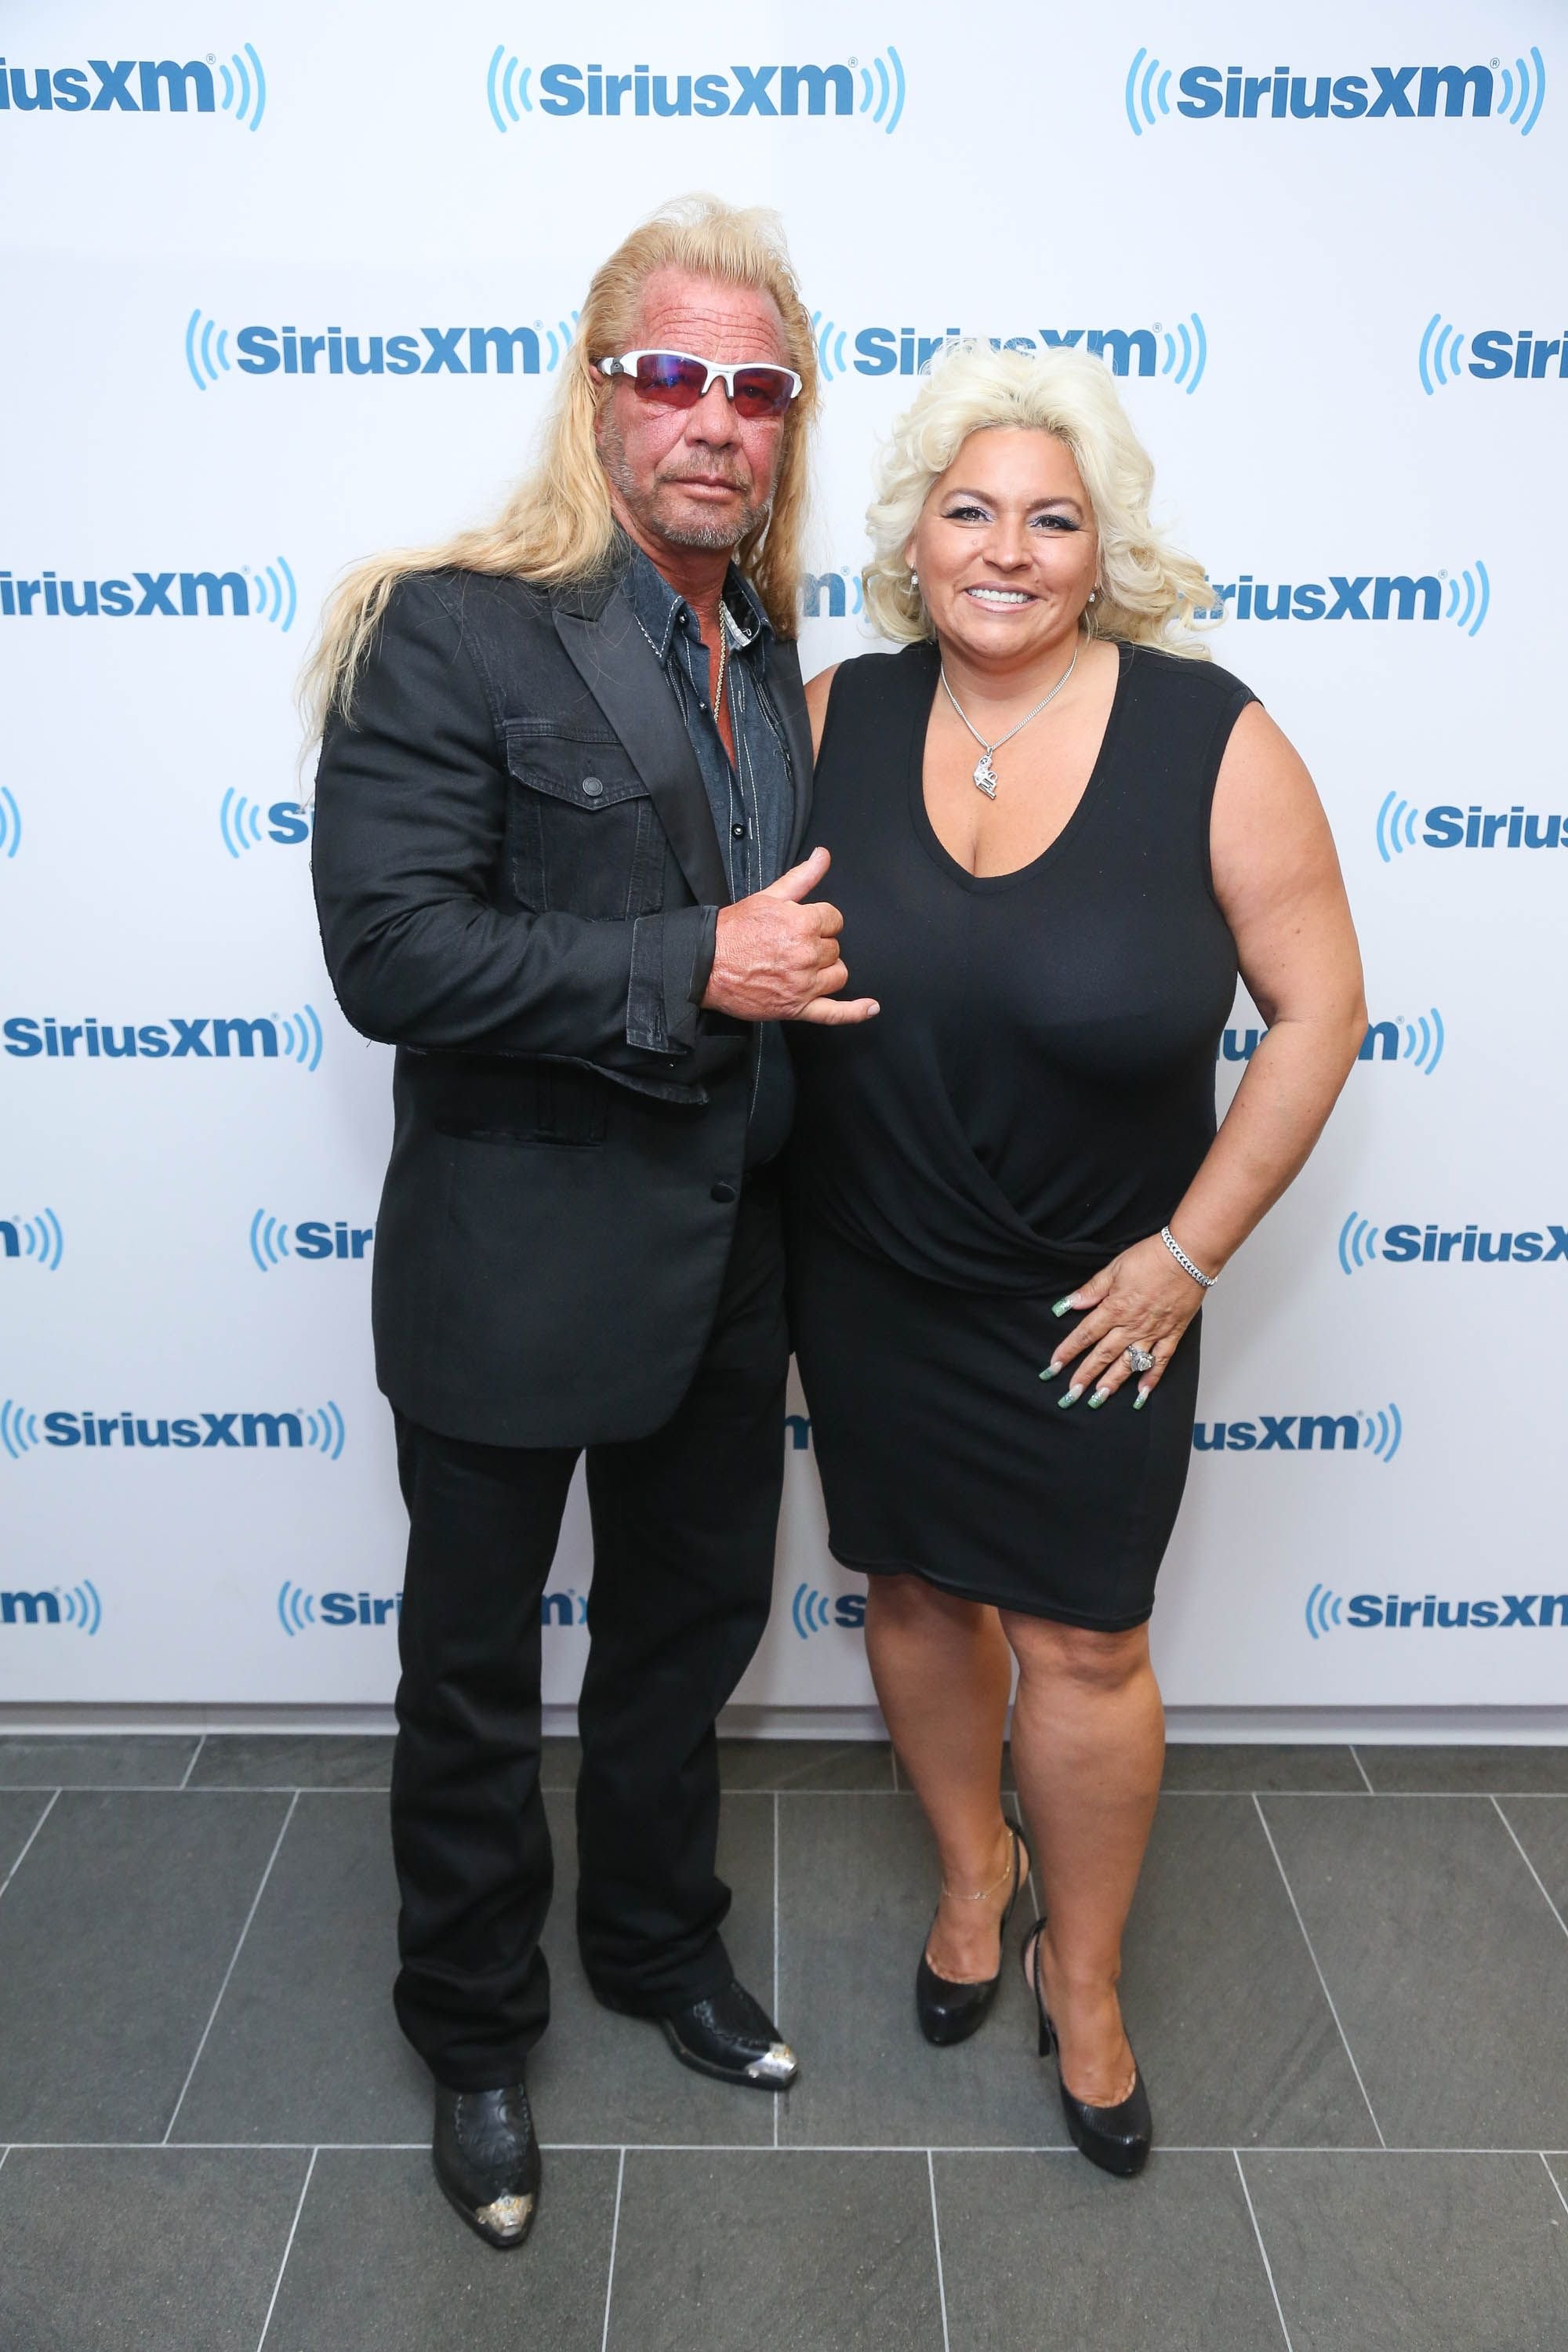 Duane and Beth Chapman at SiriusXM Studios on June 9, 2014 in New York City | Getty Images 